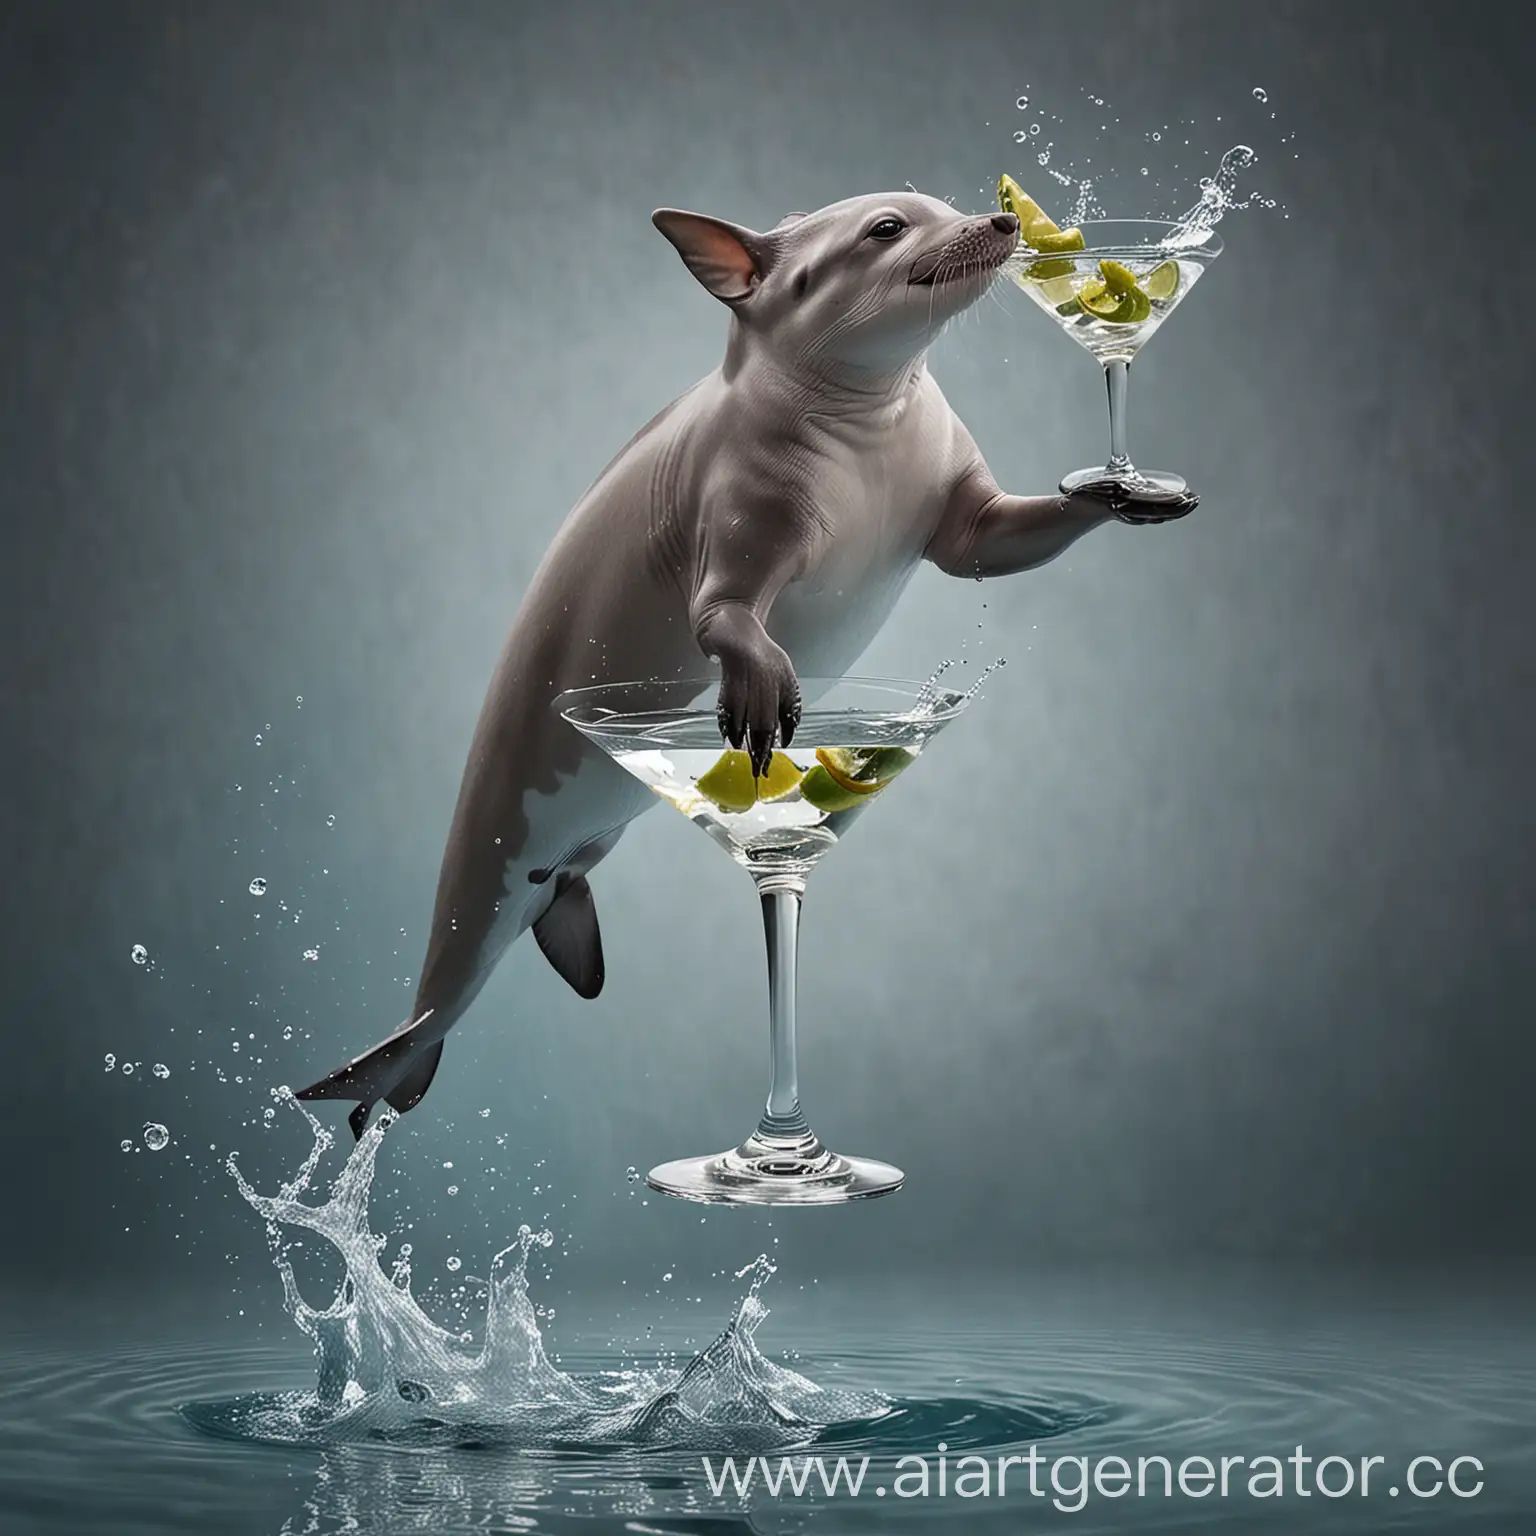 Delphin-Jumping-Over-Water-with-a-Martini-Glass